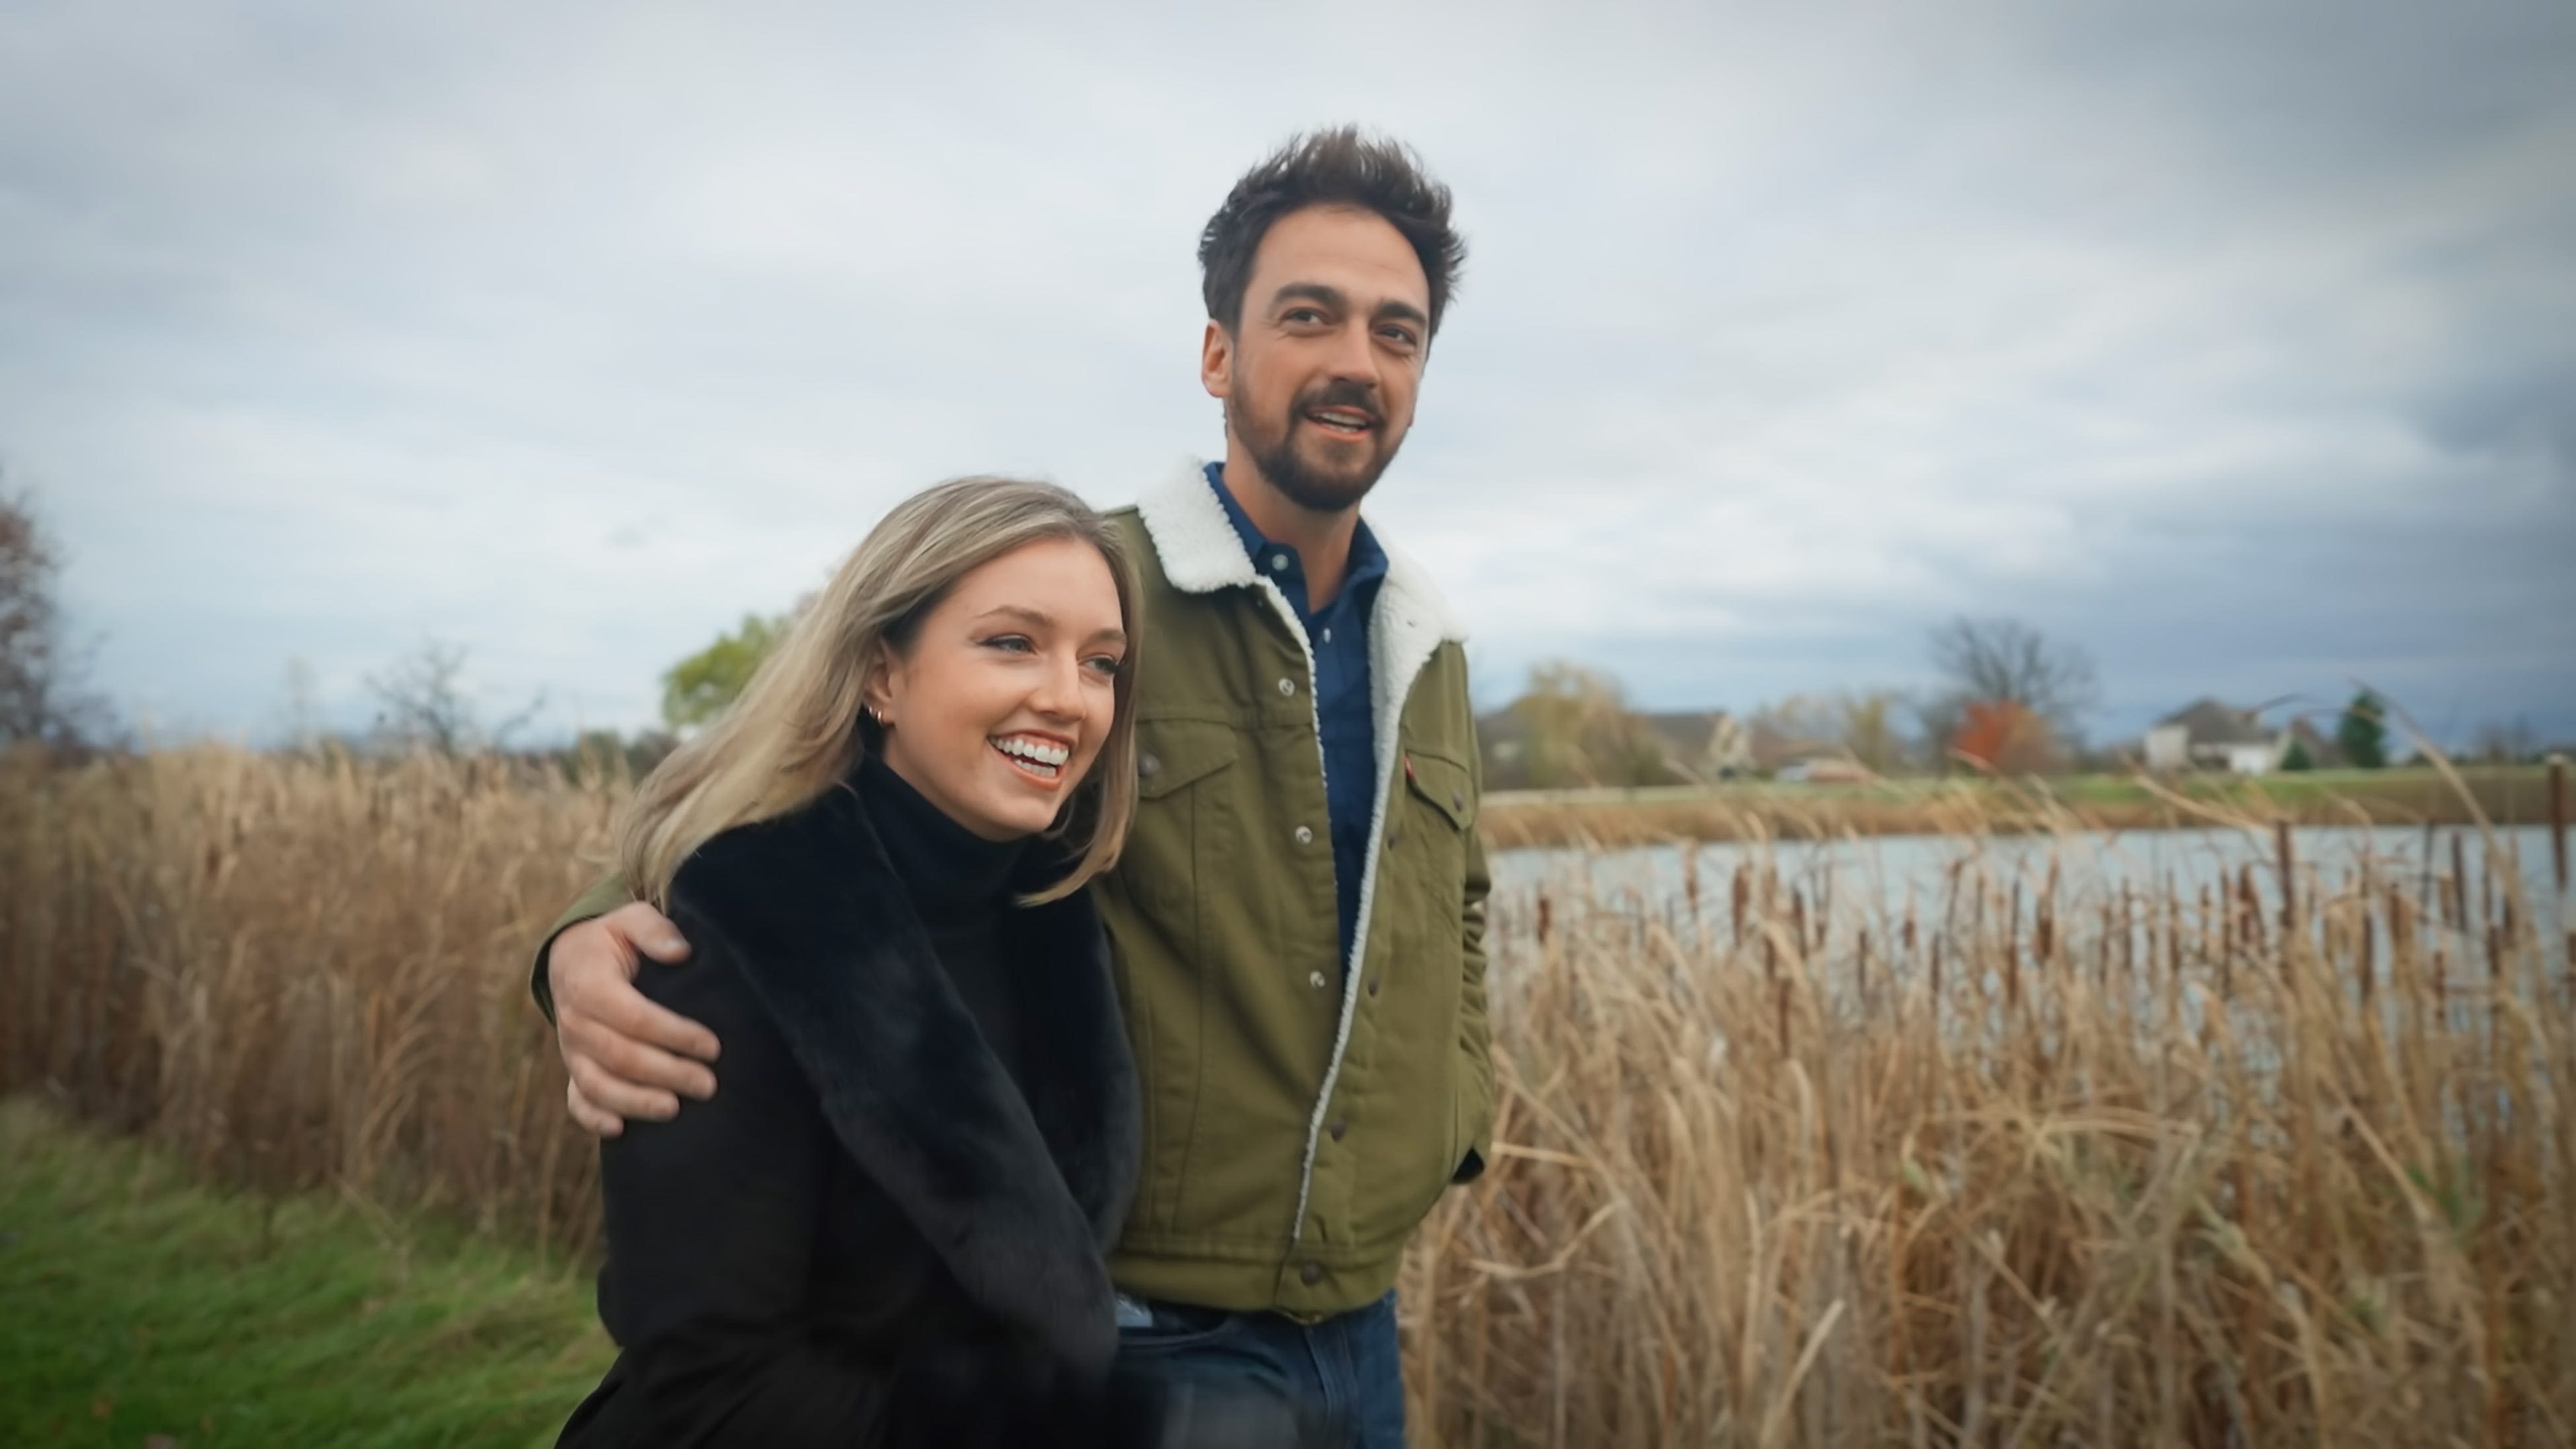 Wisconsin's Grace Girard takes us behind-the-scenes of 'Farmer Wants a Wife' decision day, shares sneak peek of what happened next